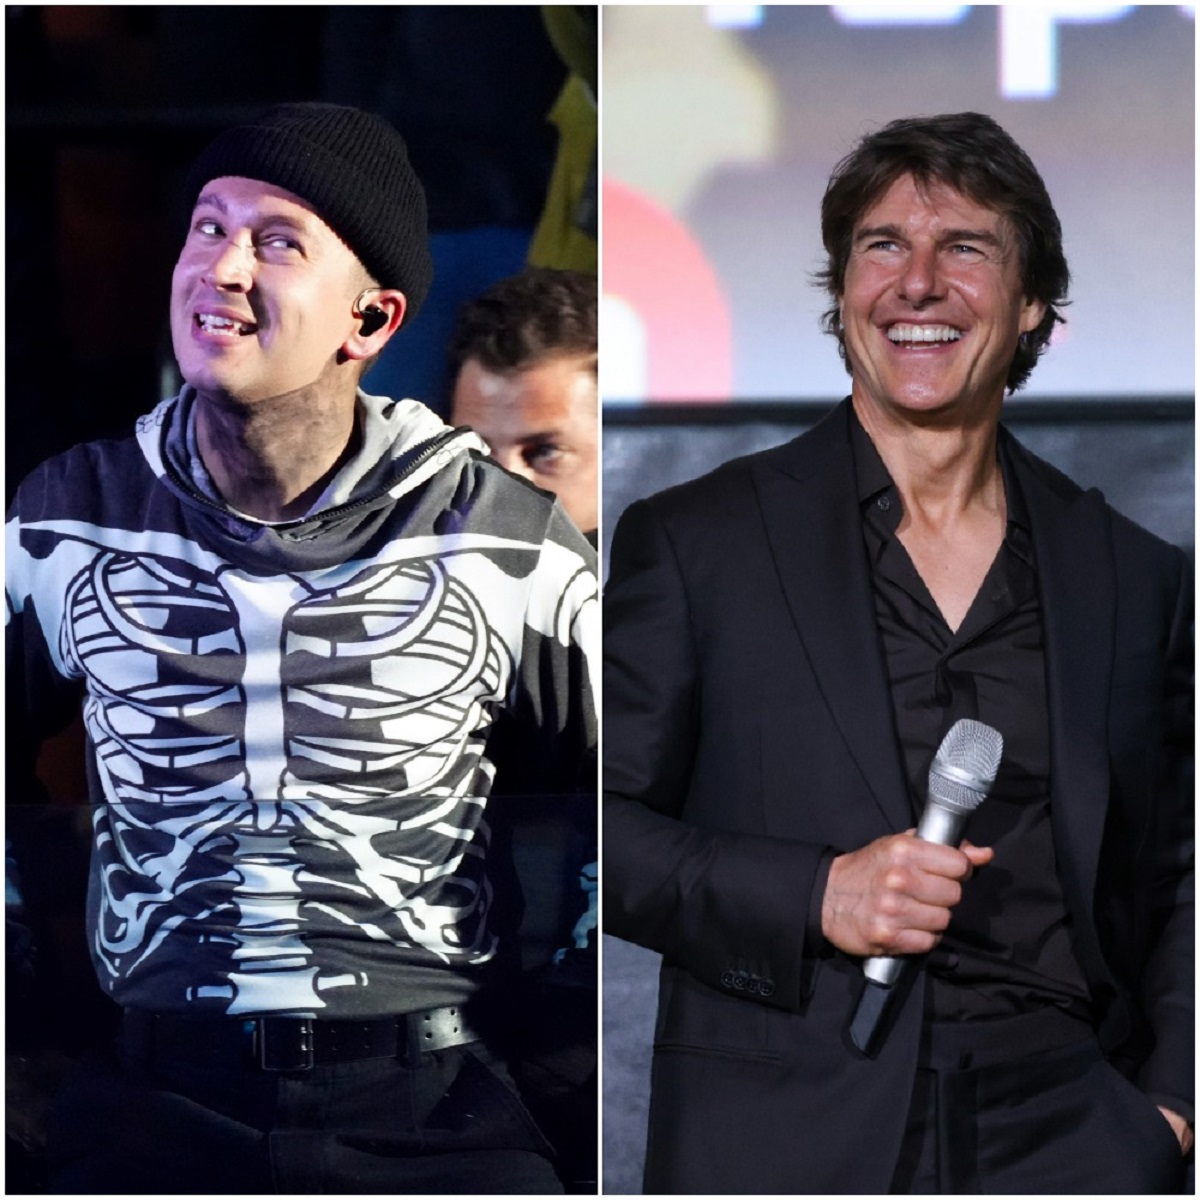 (L): Tyler Joseph of Twenty One Pilots performing onstage at the 2022 iHeartRadio ALTer EGO, (R): Tom Cruise smiling at the Mexico premiere of 'Top Gun Maverick'